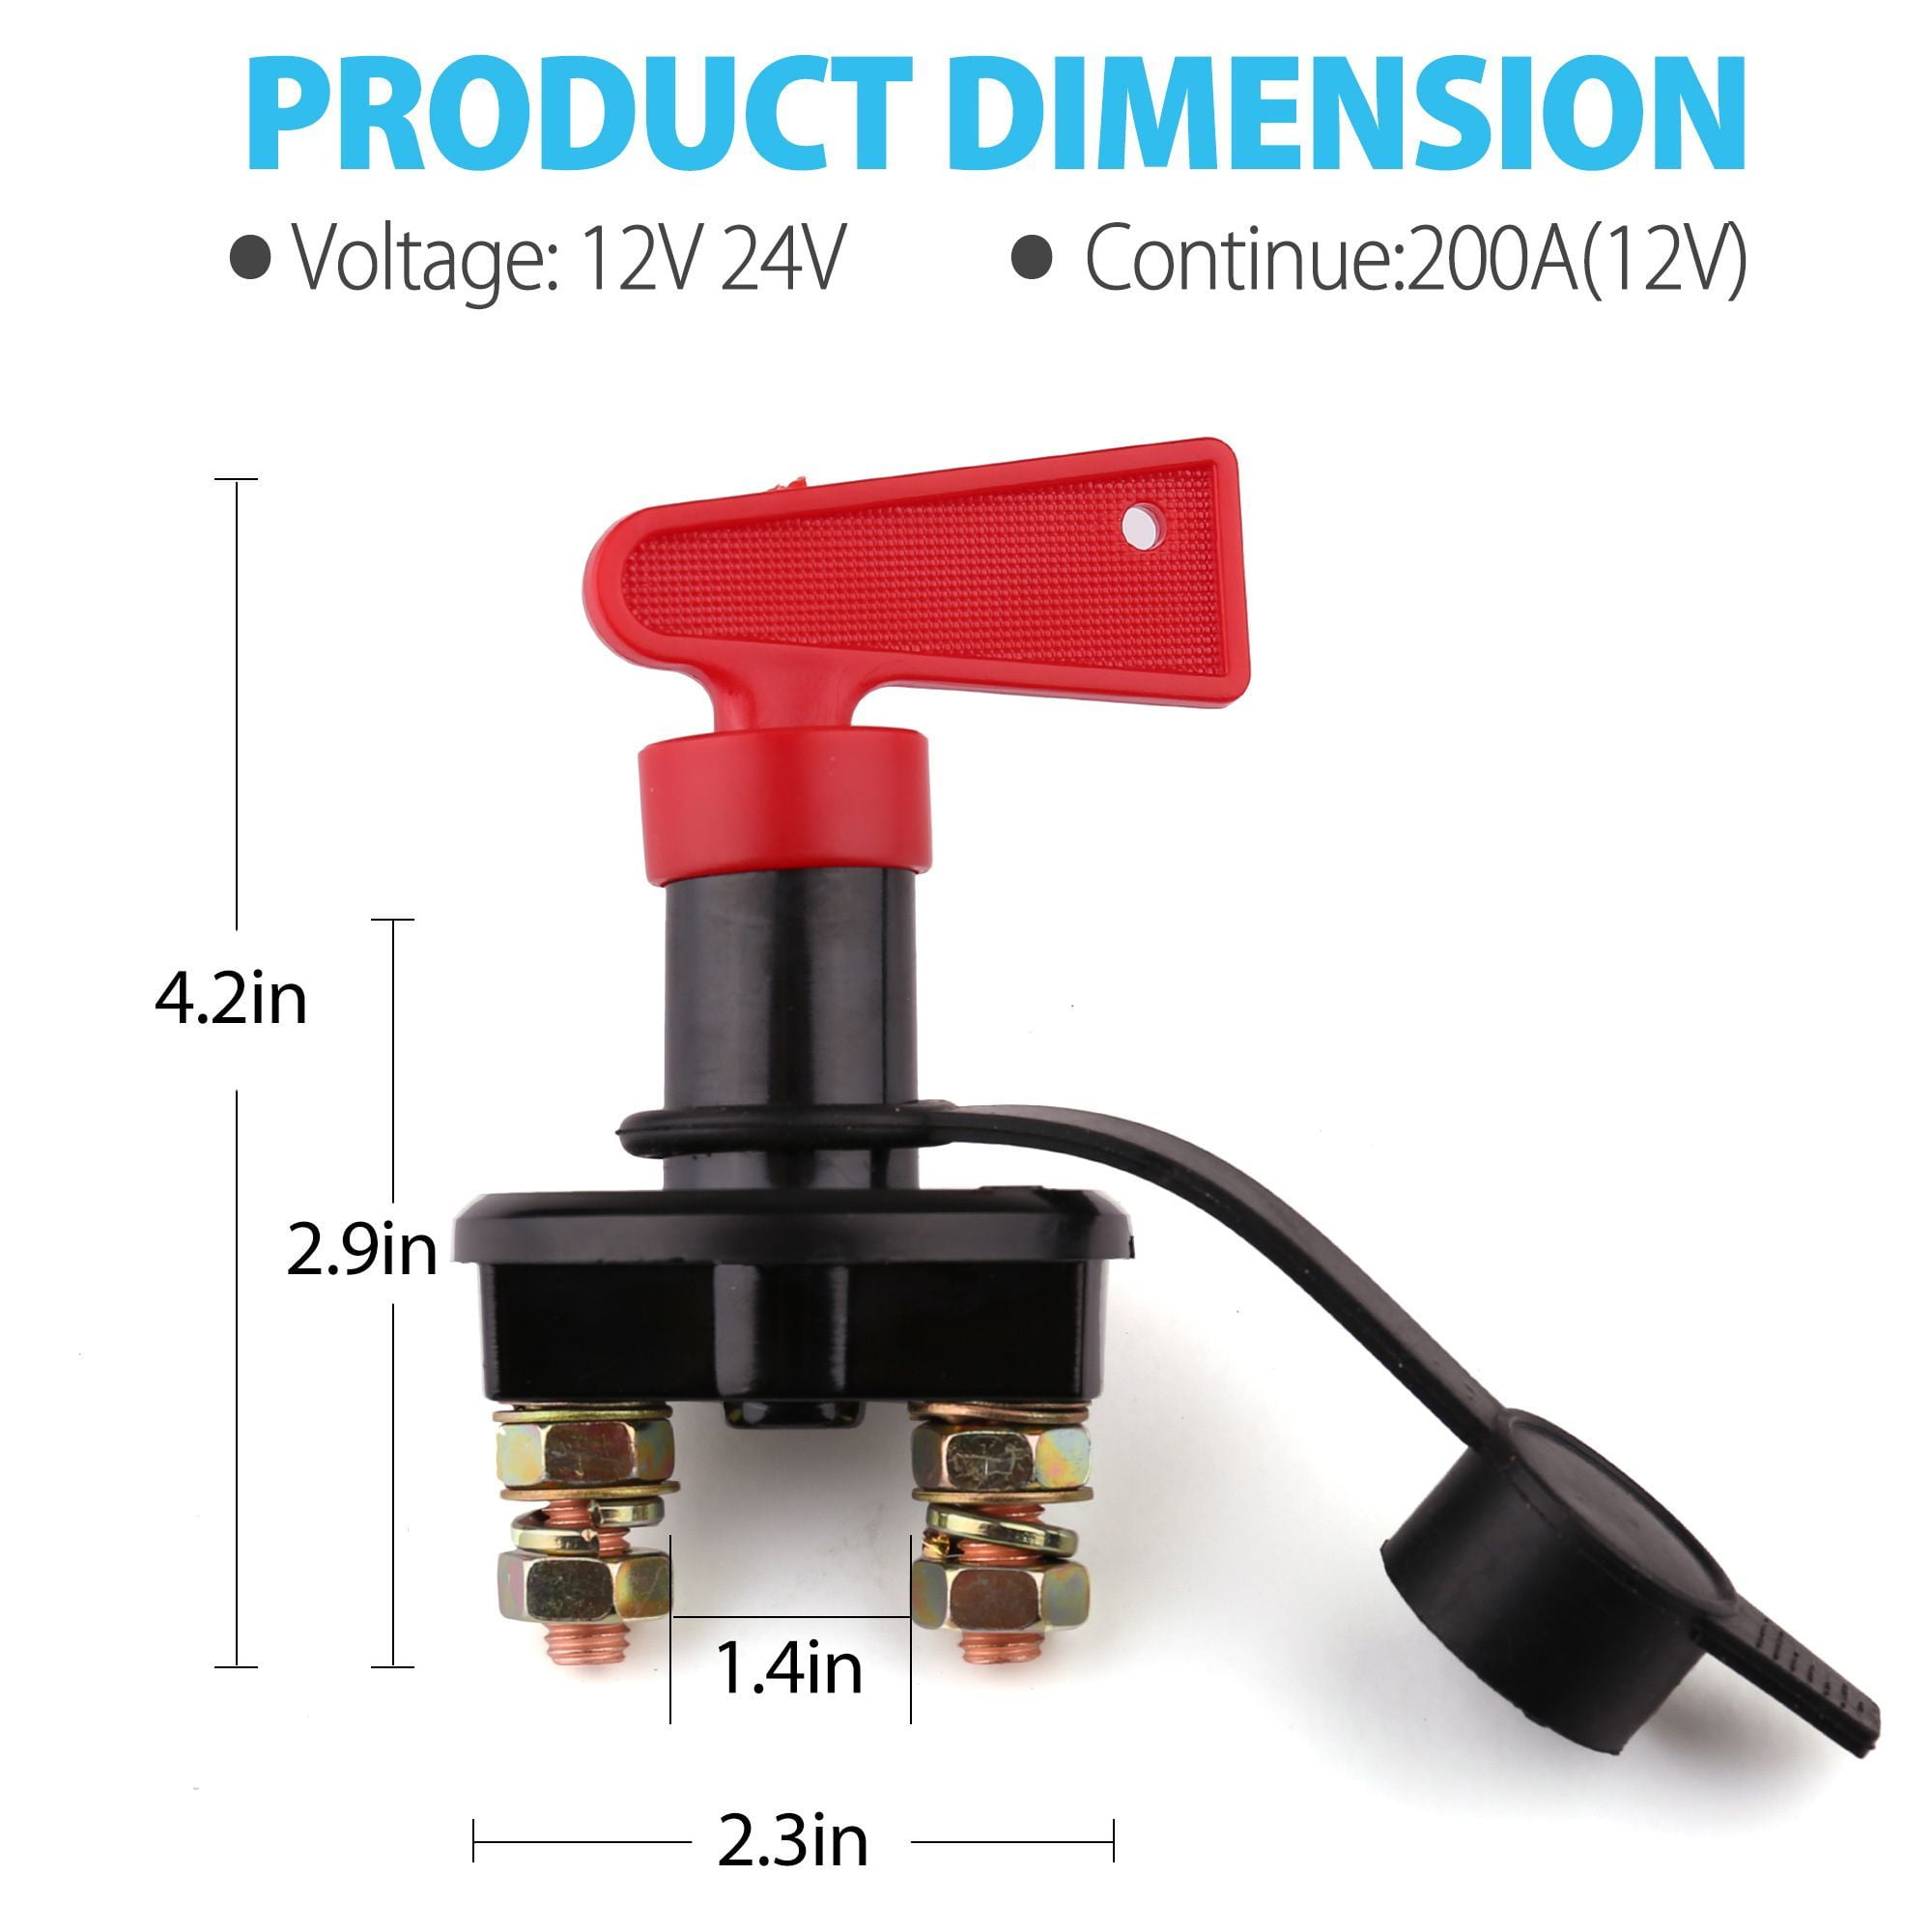 Viviance Vihicle Cut Off Switch Side Post Battery Master Disconnect Isolator